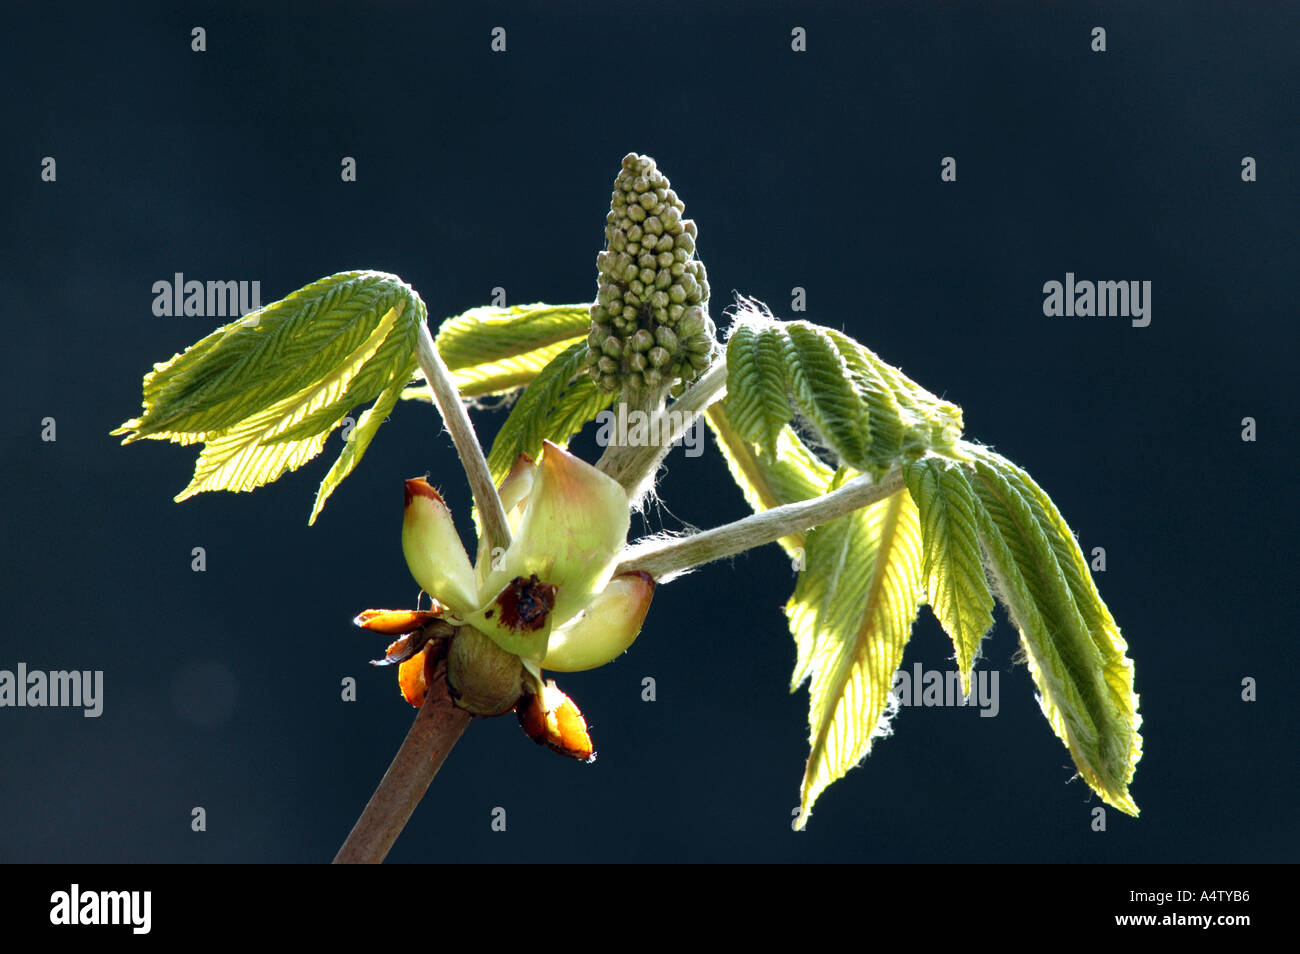 Horse chestnut flower and new leaves Stock Photo